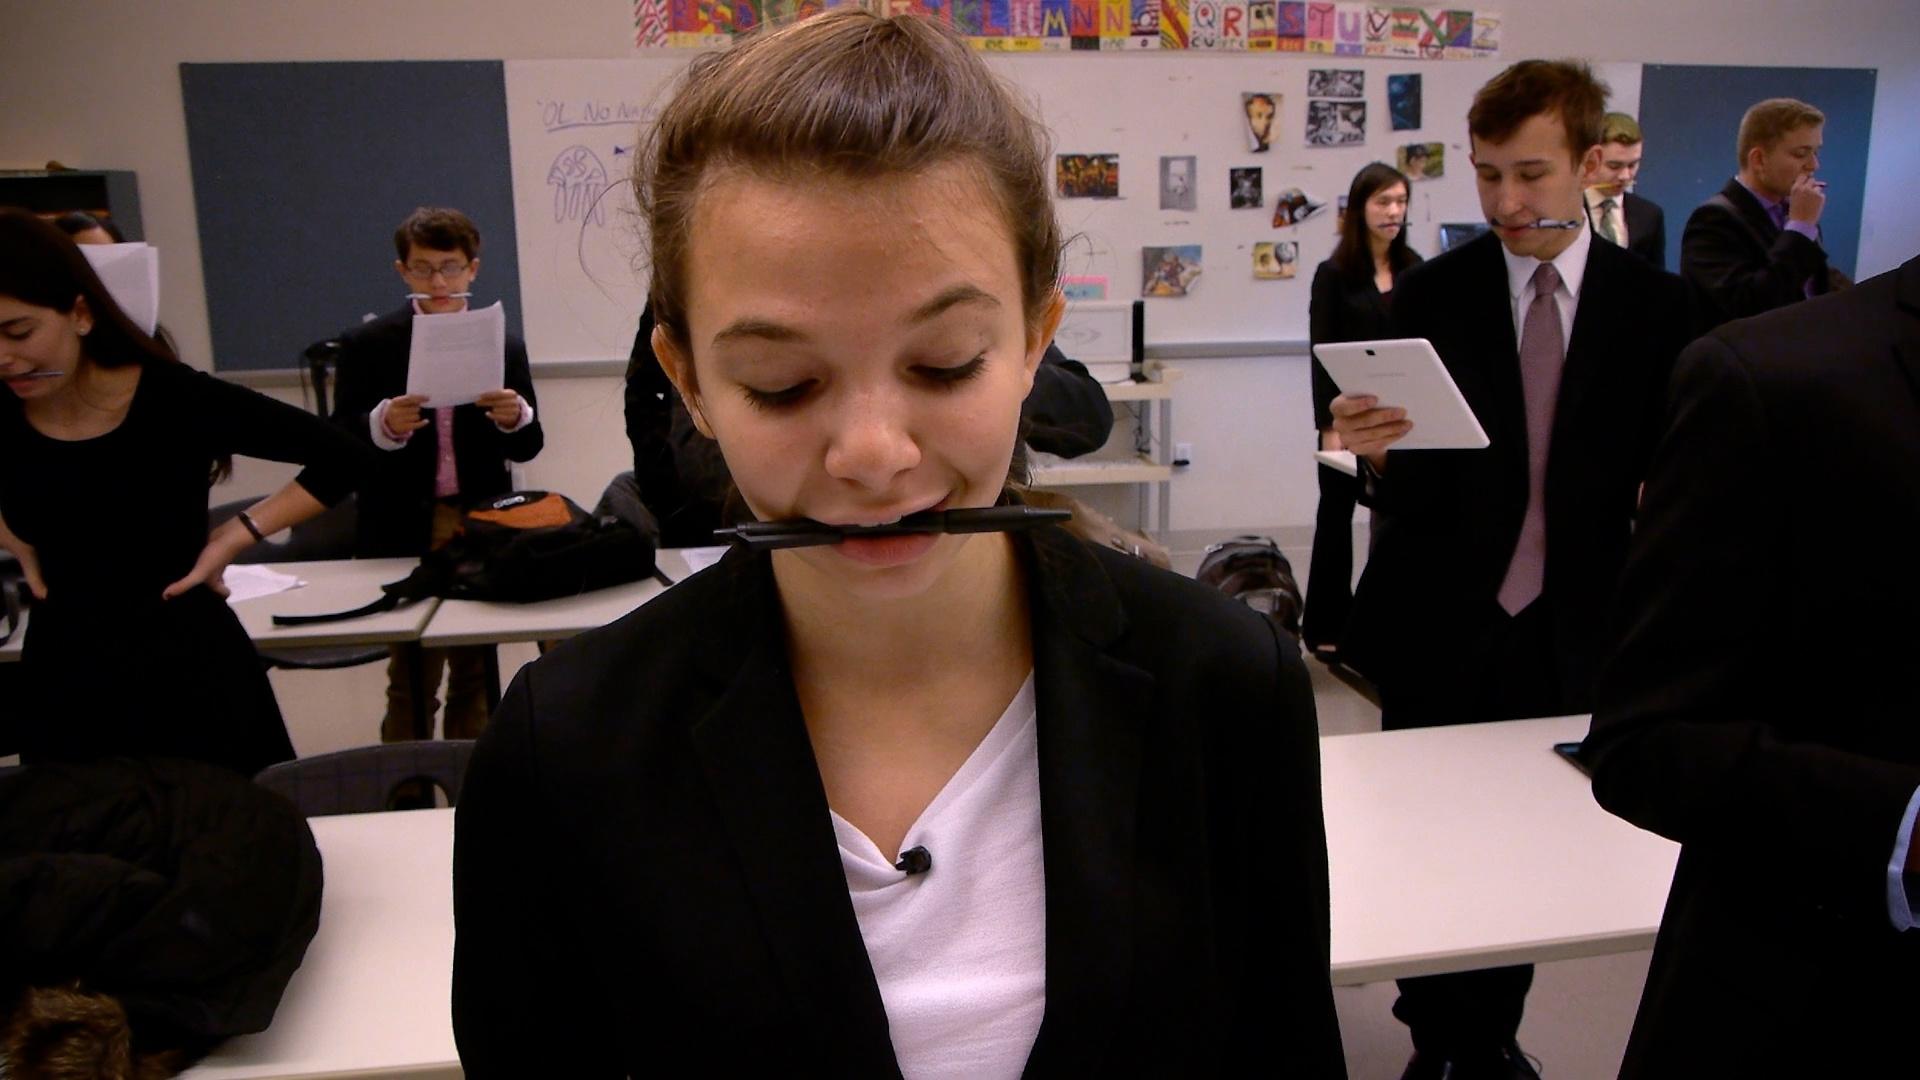 Gaby and fellow students participate in a speech exercise by talking with pens in their mouths.